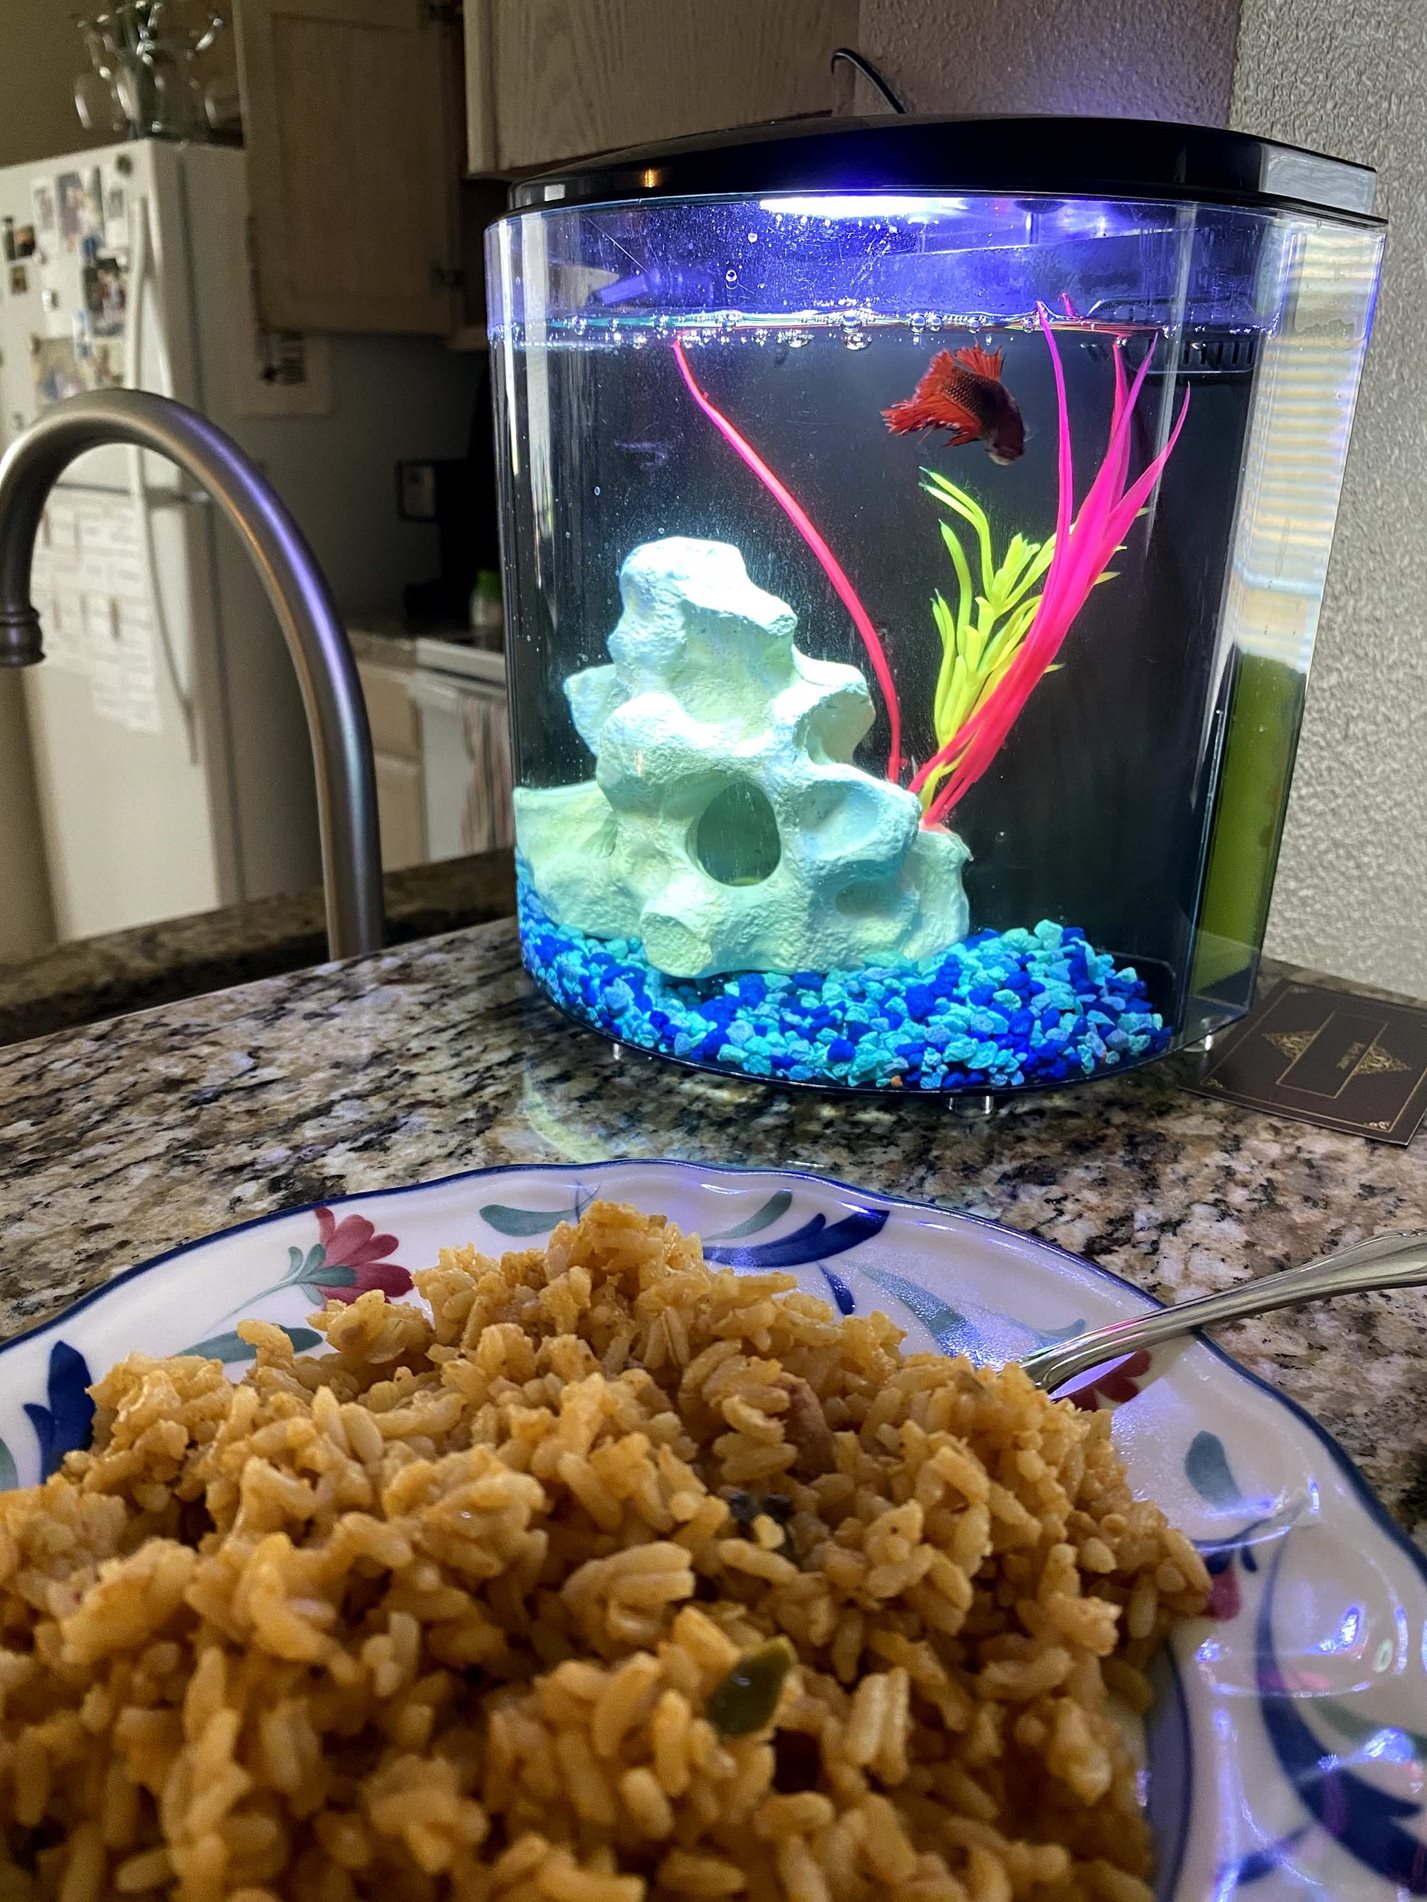 A student's bowl of rice and her goldfish bowl on the counter